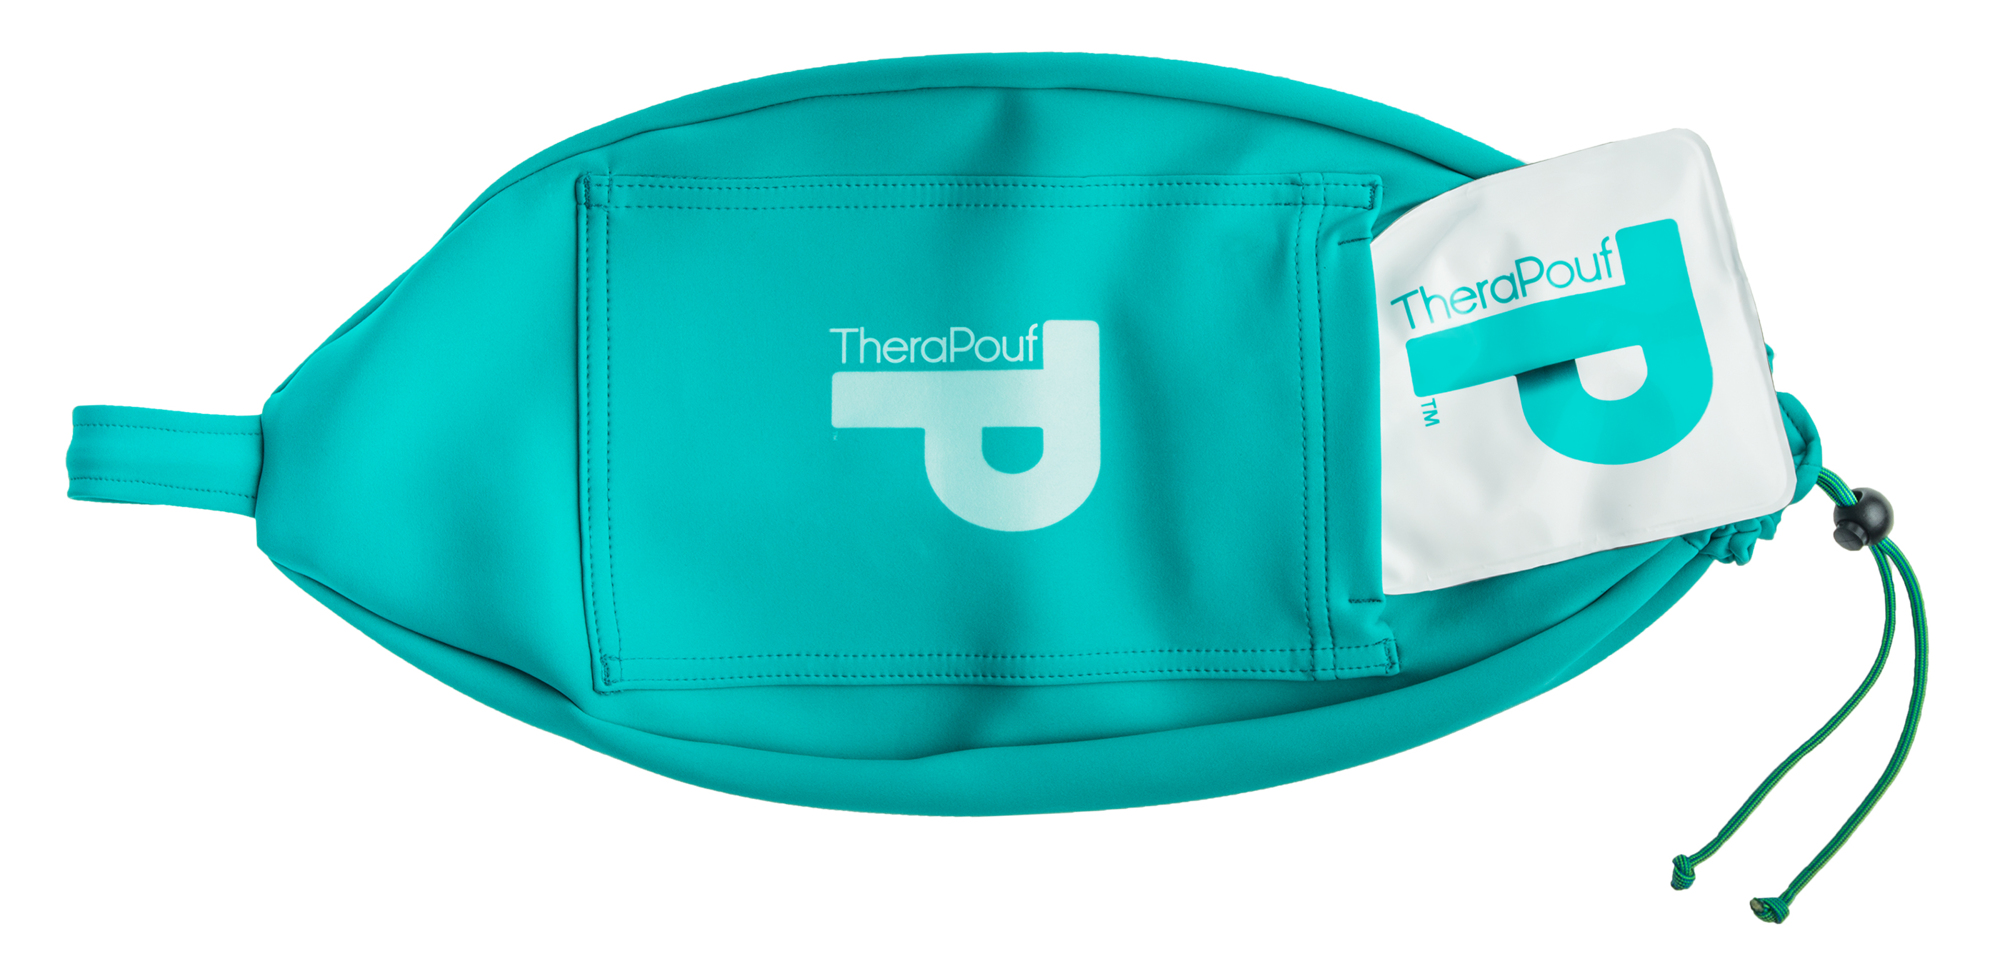 The original TheraPouf model includes a neoprene pouch, an inflatable inside and a cold-heat pack that fits into a pocket. Courtesy TheraPouf